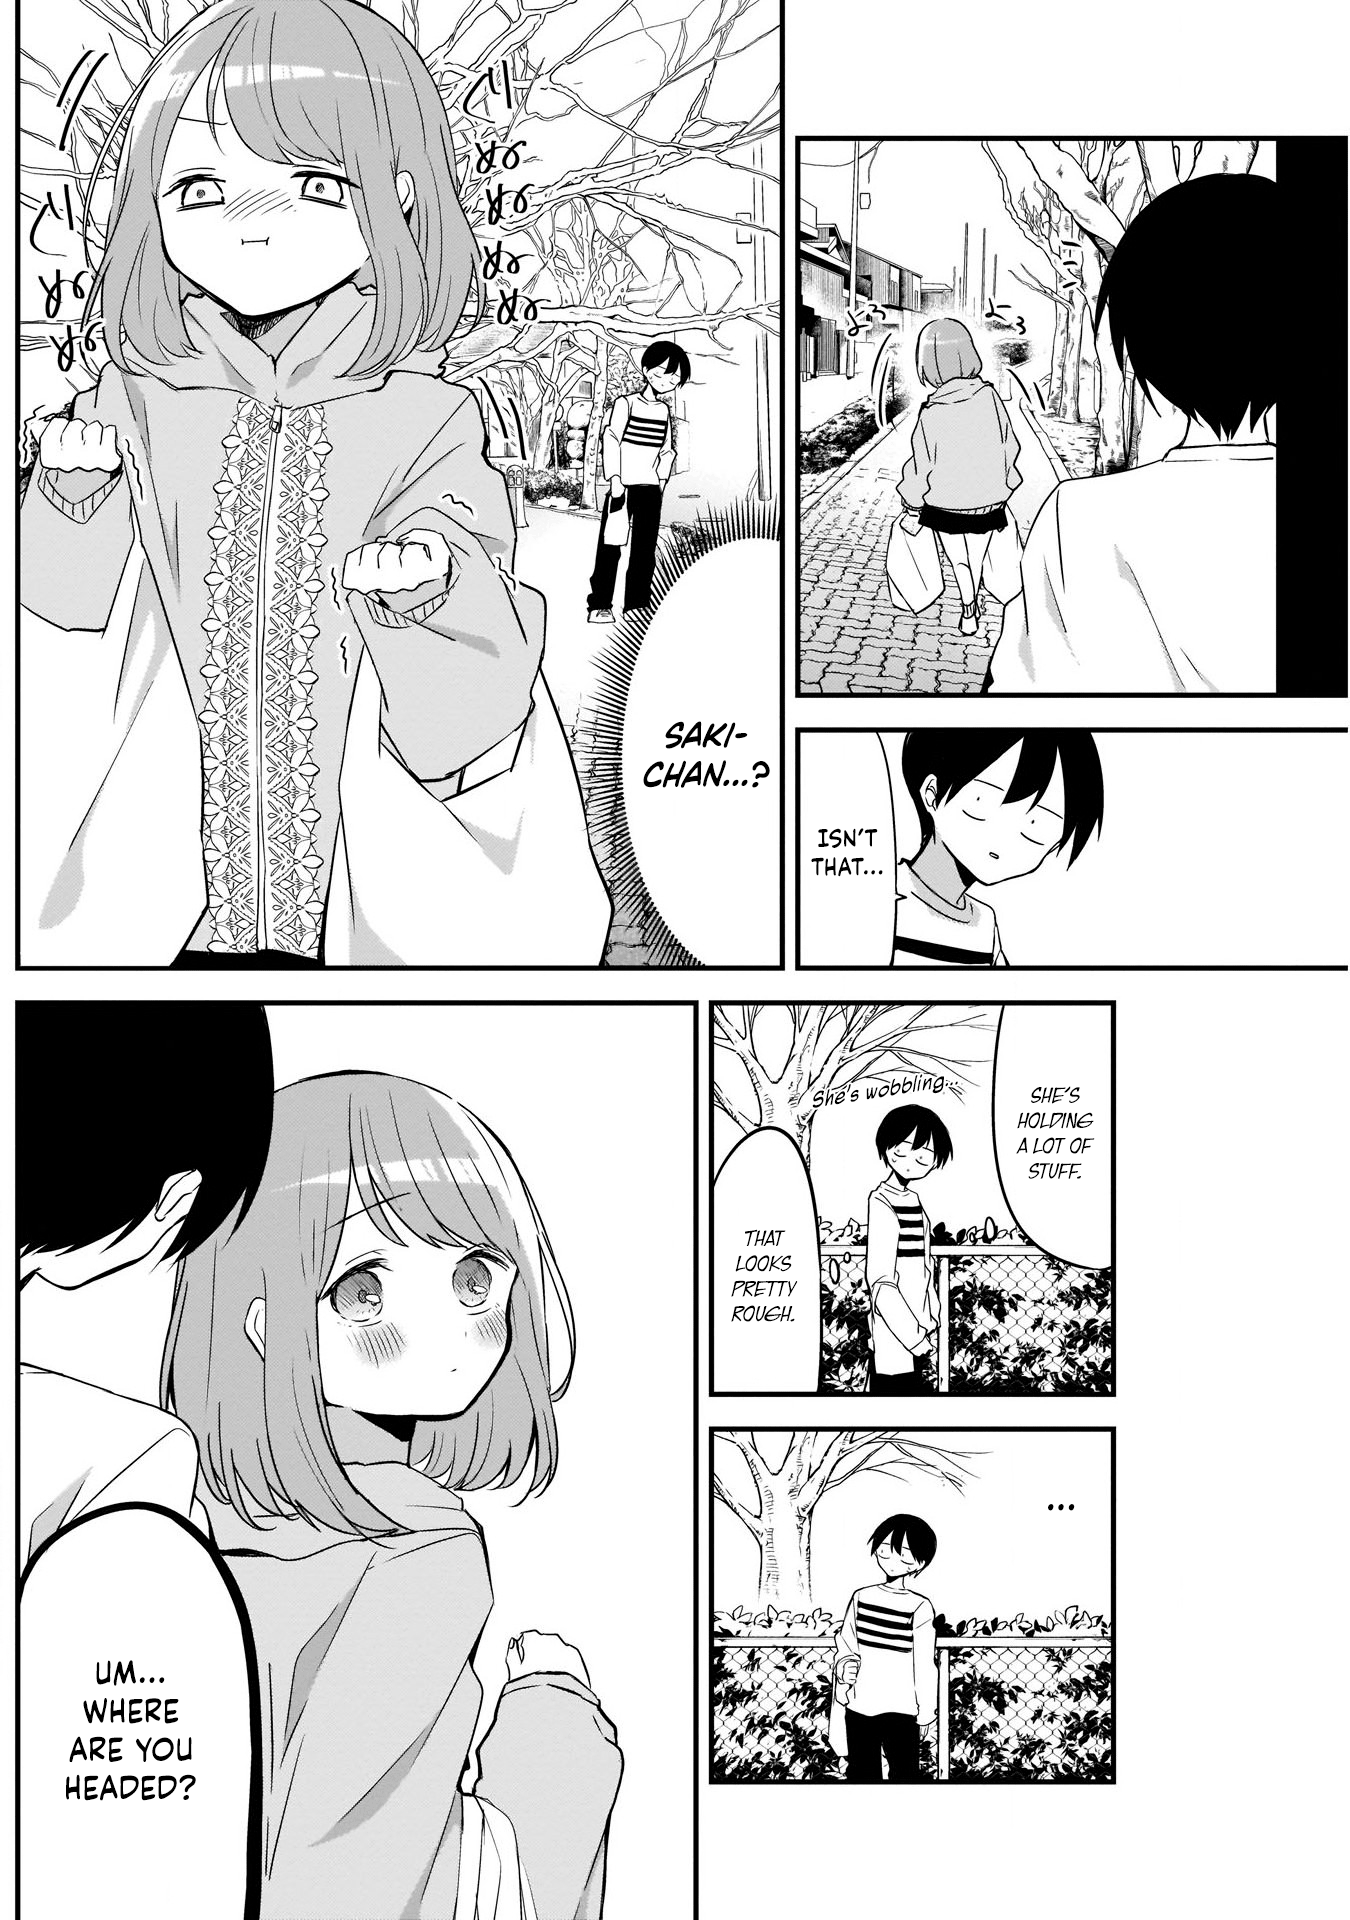 Kubo-San Doesn't Leave Me Be (A Mob) - Page 2